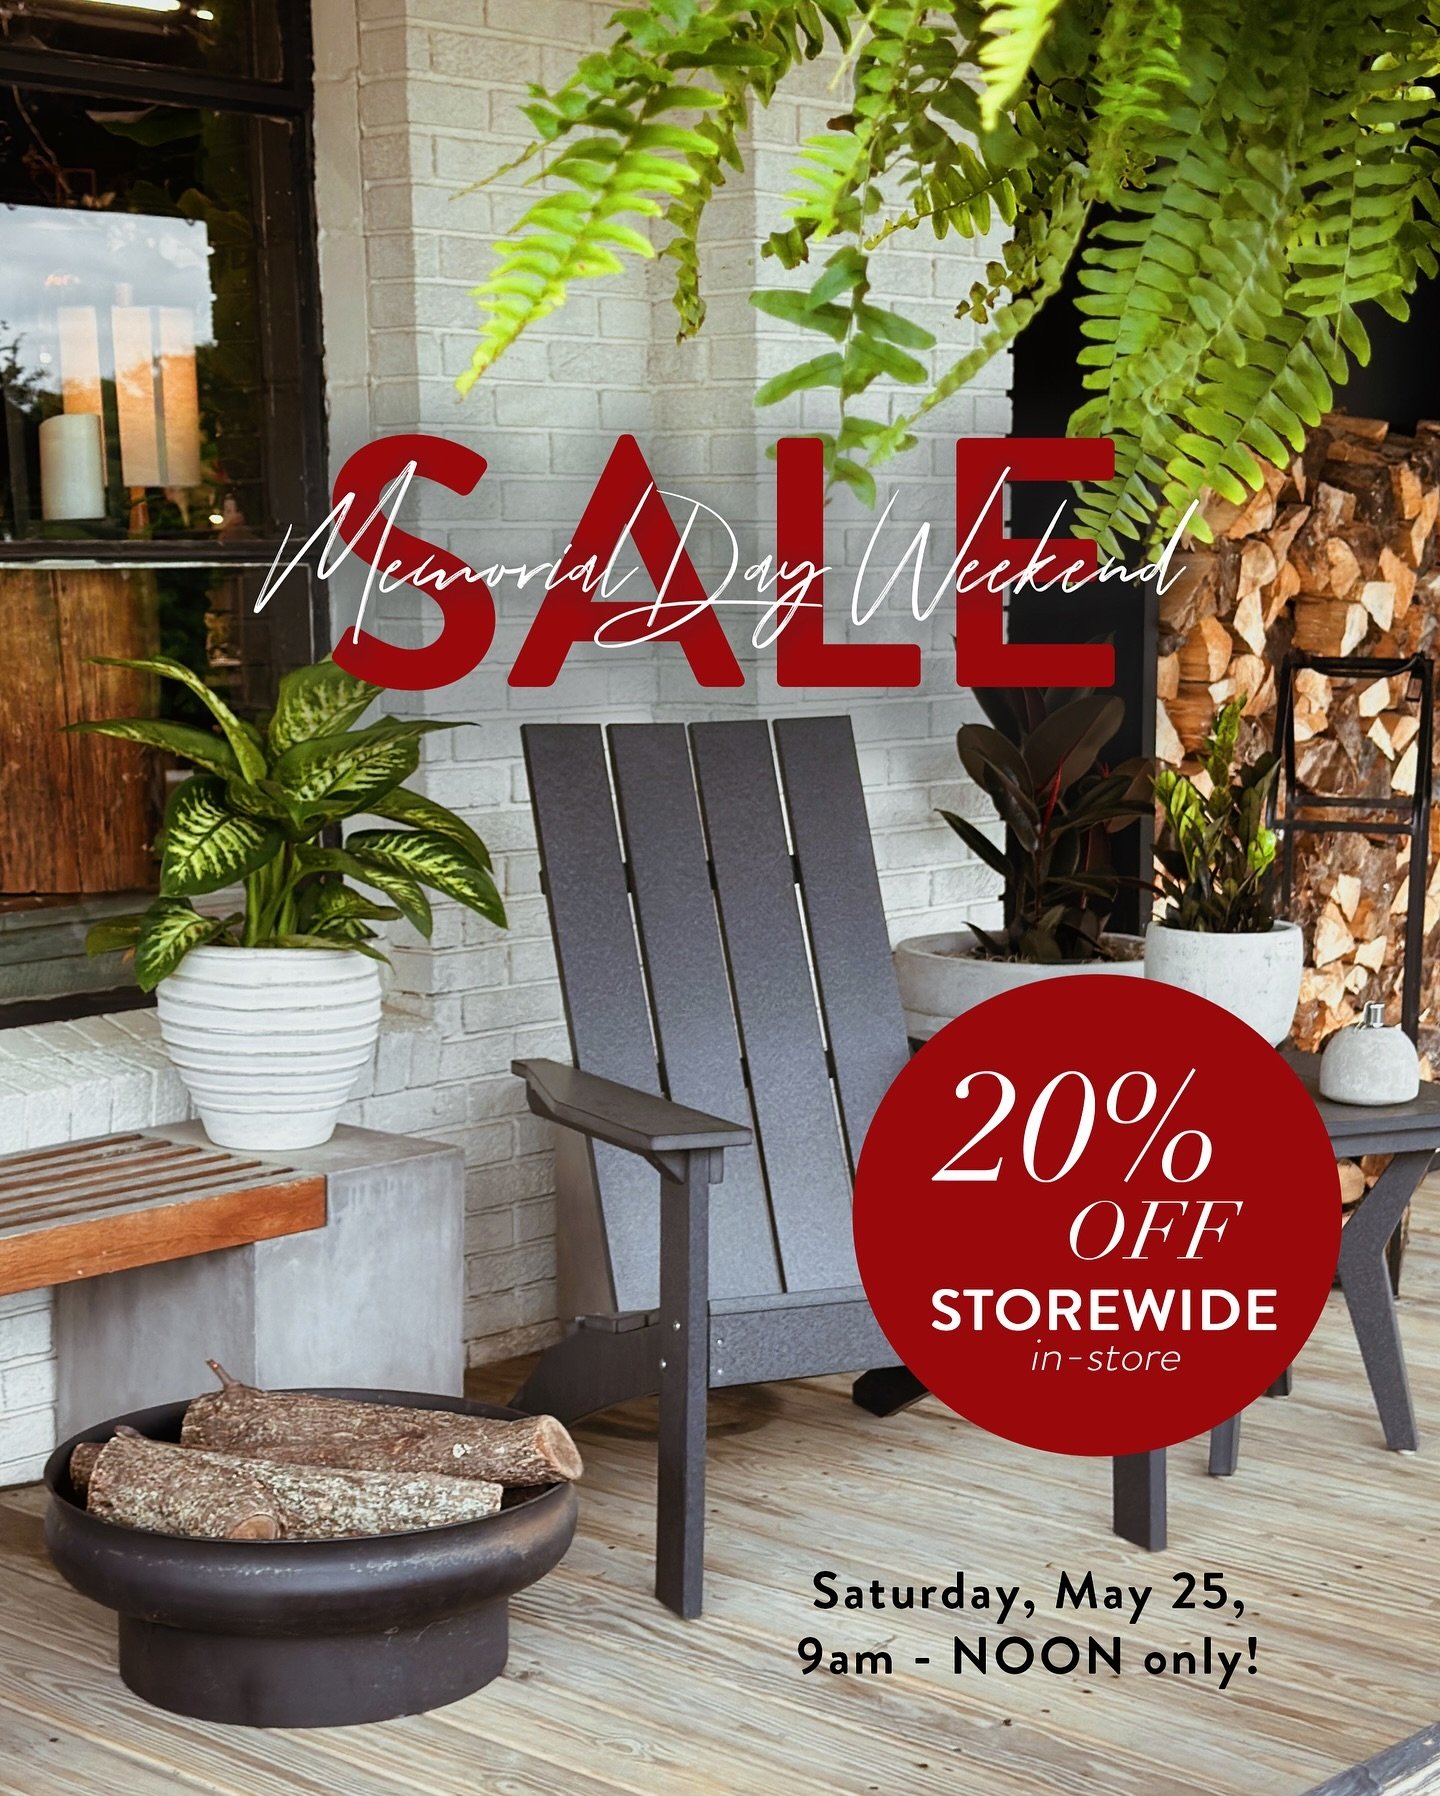 🇺🇸 Memorial Day Weekend SALE
✨ at bfearless. at HOME
[ Saturday, May 25, 9am-noon ONLY! ]

🎈20% OFF your purchase in-store!
*not combined with other offers

🎈Enjoy @collective.coffeeco in our courtyard!

🎈Please note our store hours for this day